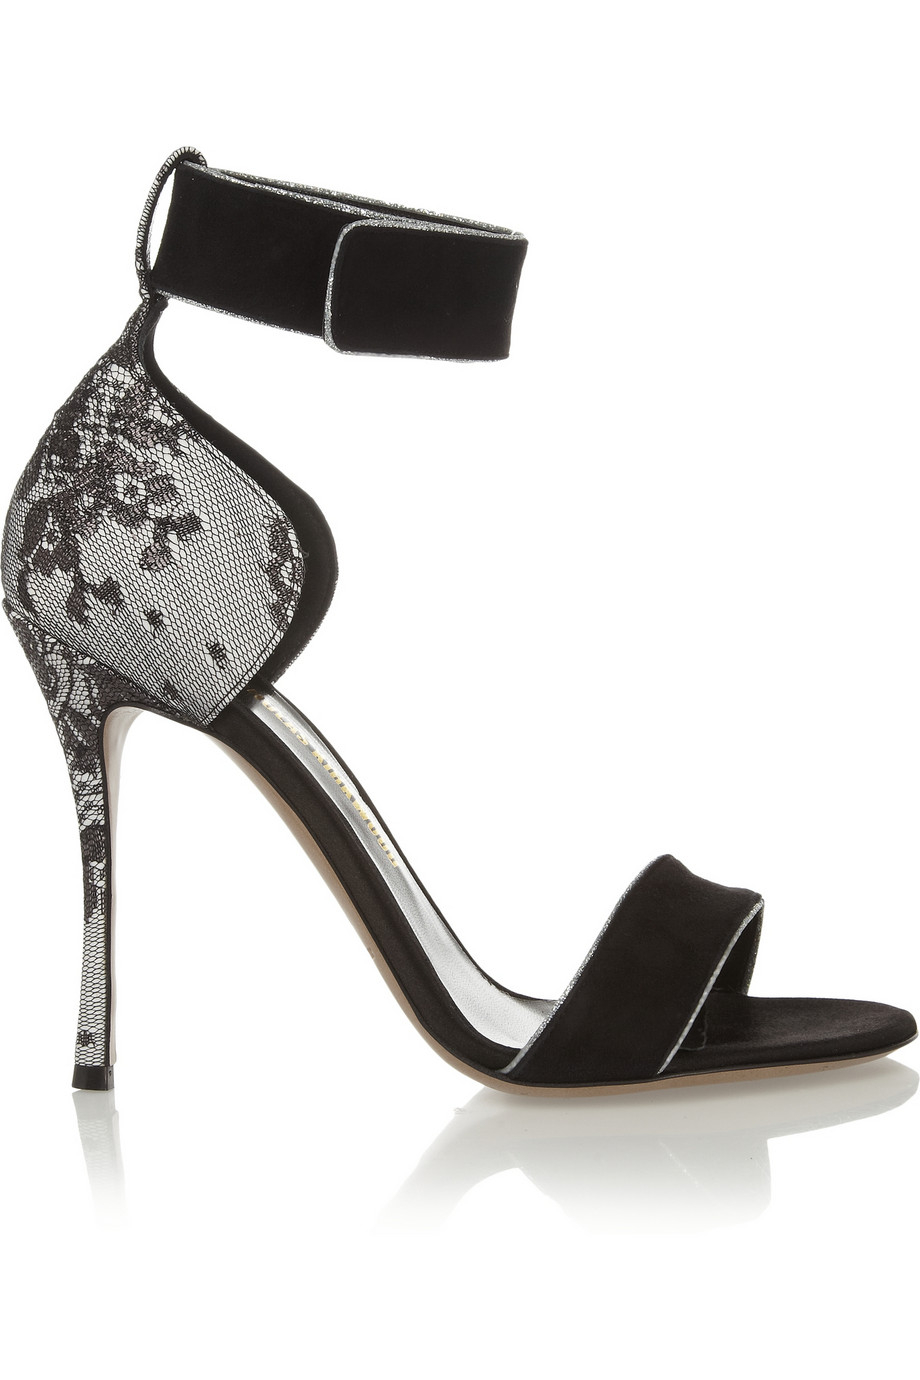 Lyst - Nicholas Kirkwood Suede, Lace And Satin Sandals in Black